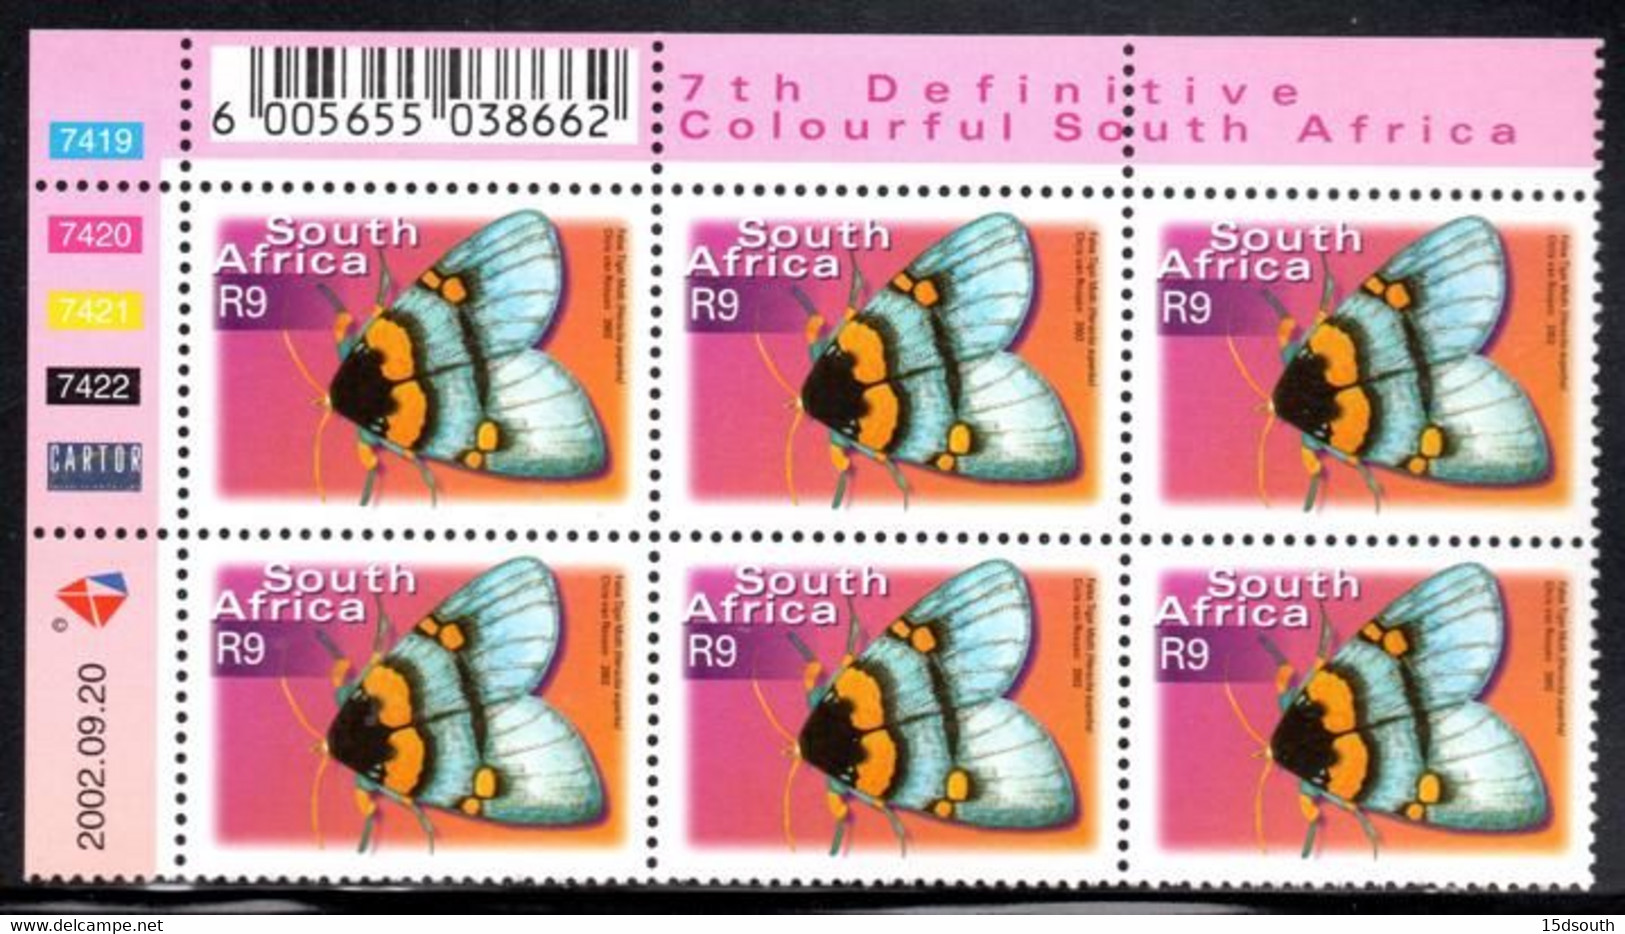 South Africa - 2002 7th Definitive Fauna And Flora R9 Moth Control Block (**) (2002.09.20) - Hojas Bloque